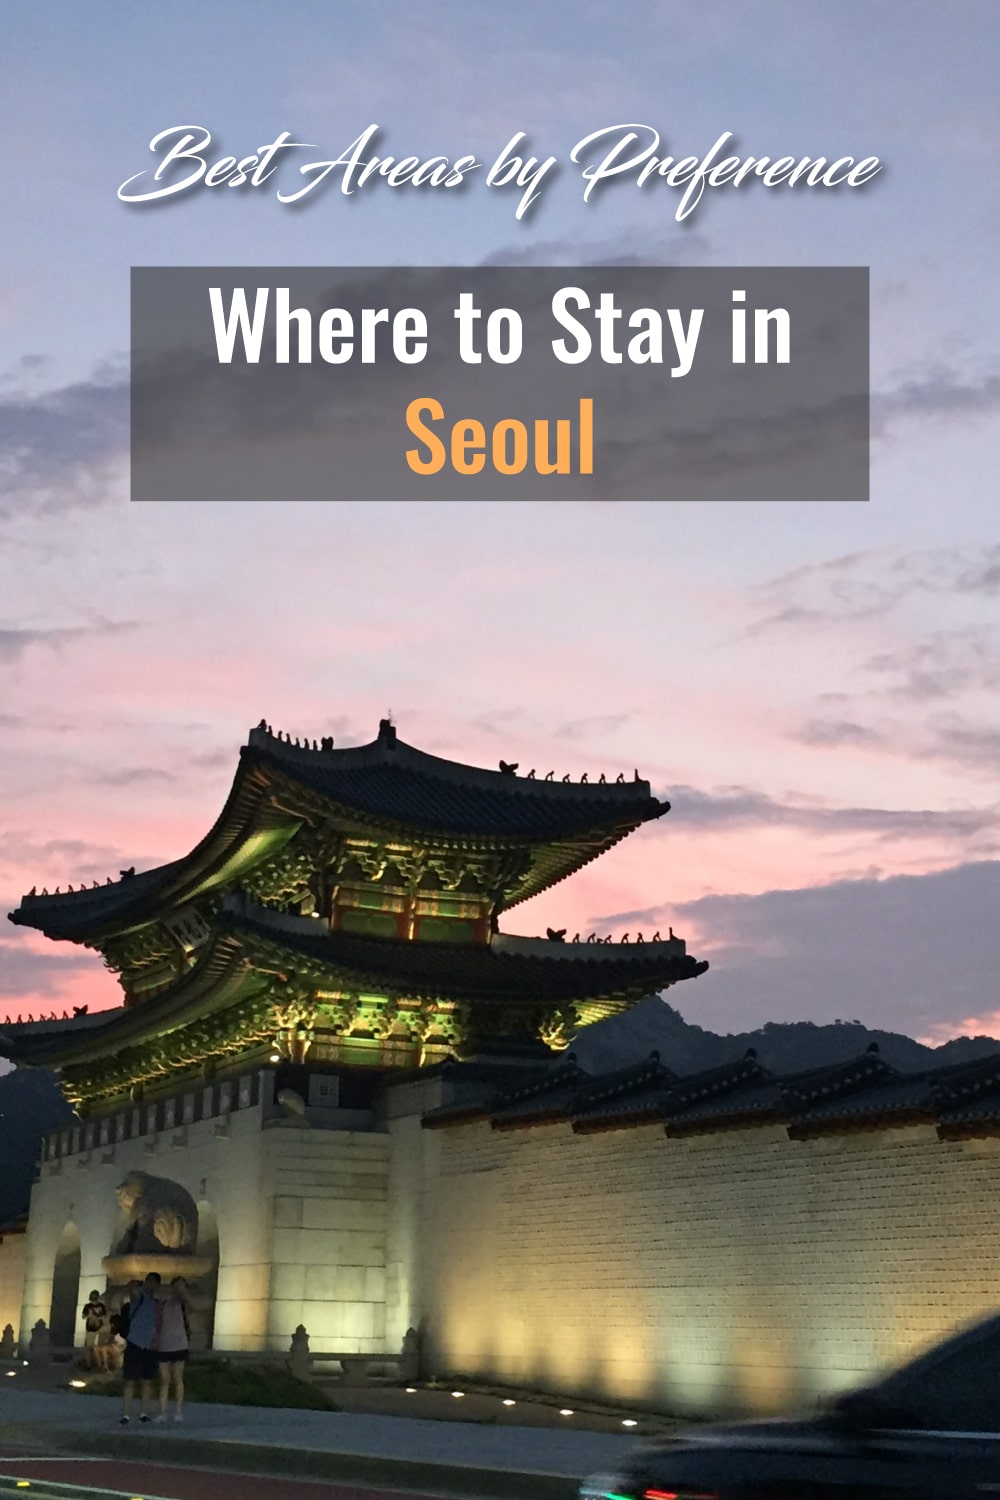 Lingua Asia Best Areas by Preference Where to Stay in Seoul